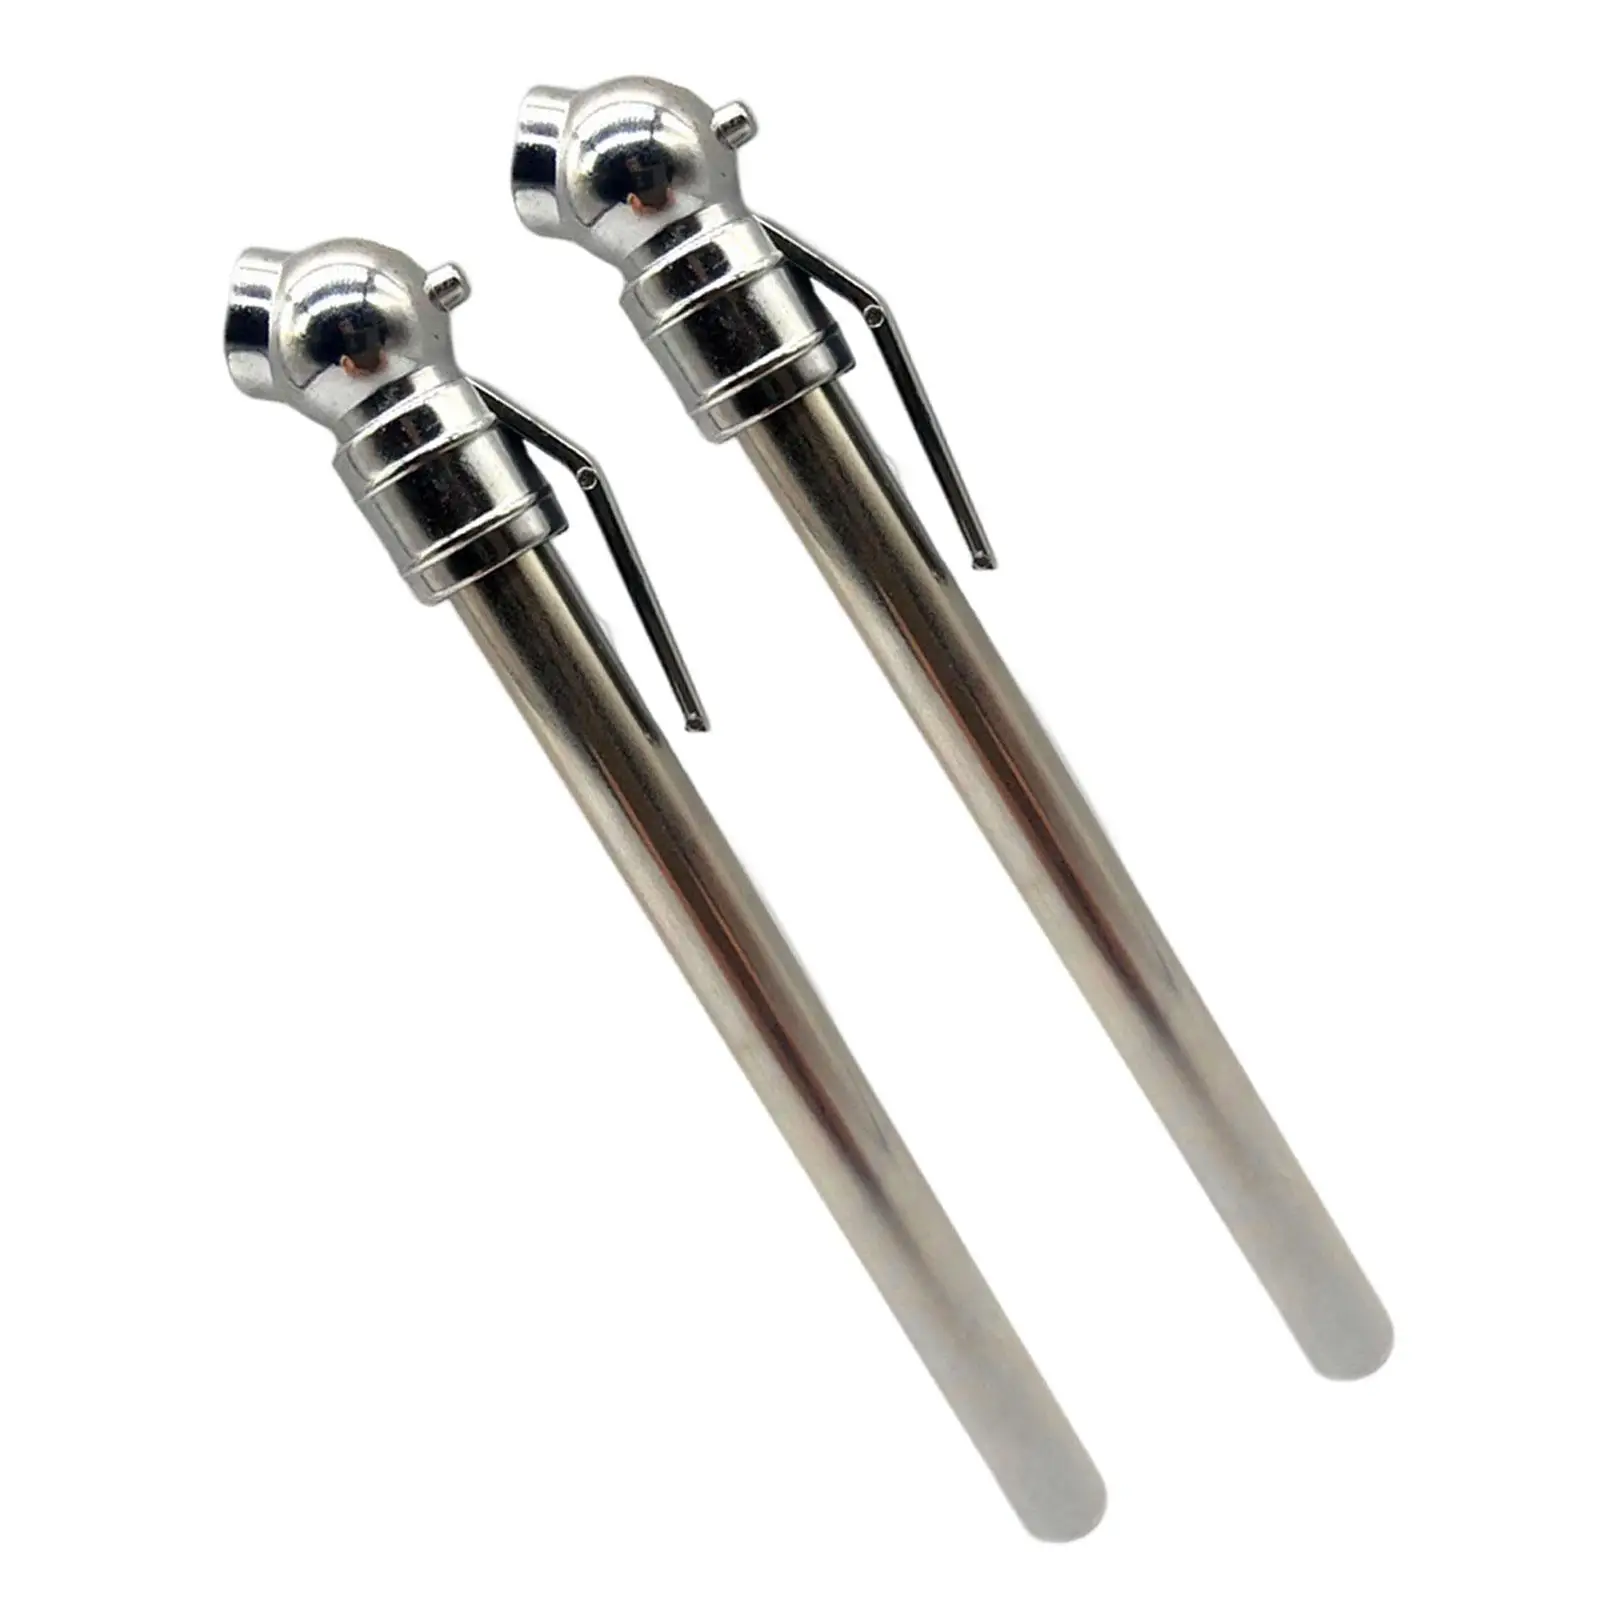 2 Pieces Pencil Tire Pressure Gauge Heavy Duty Chrome Metal Head Stainless Steel Body for Cars Rvs Trucks Vehicles Motorcycles